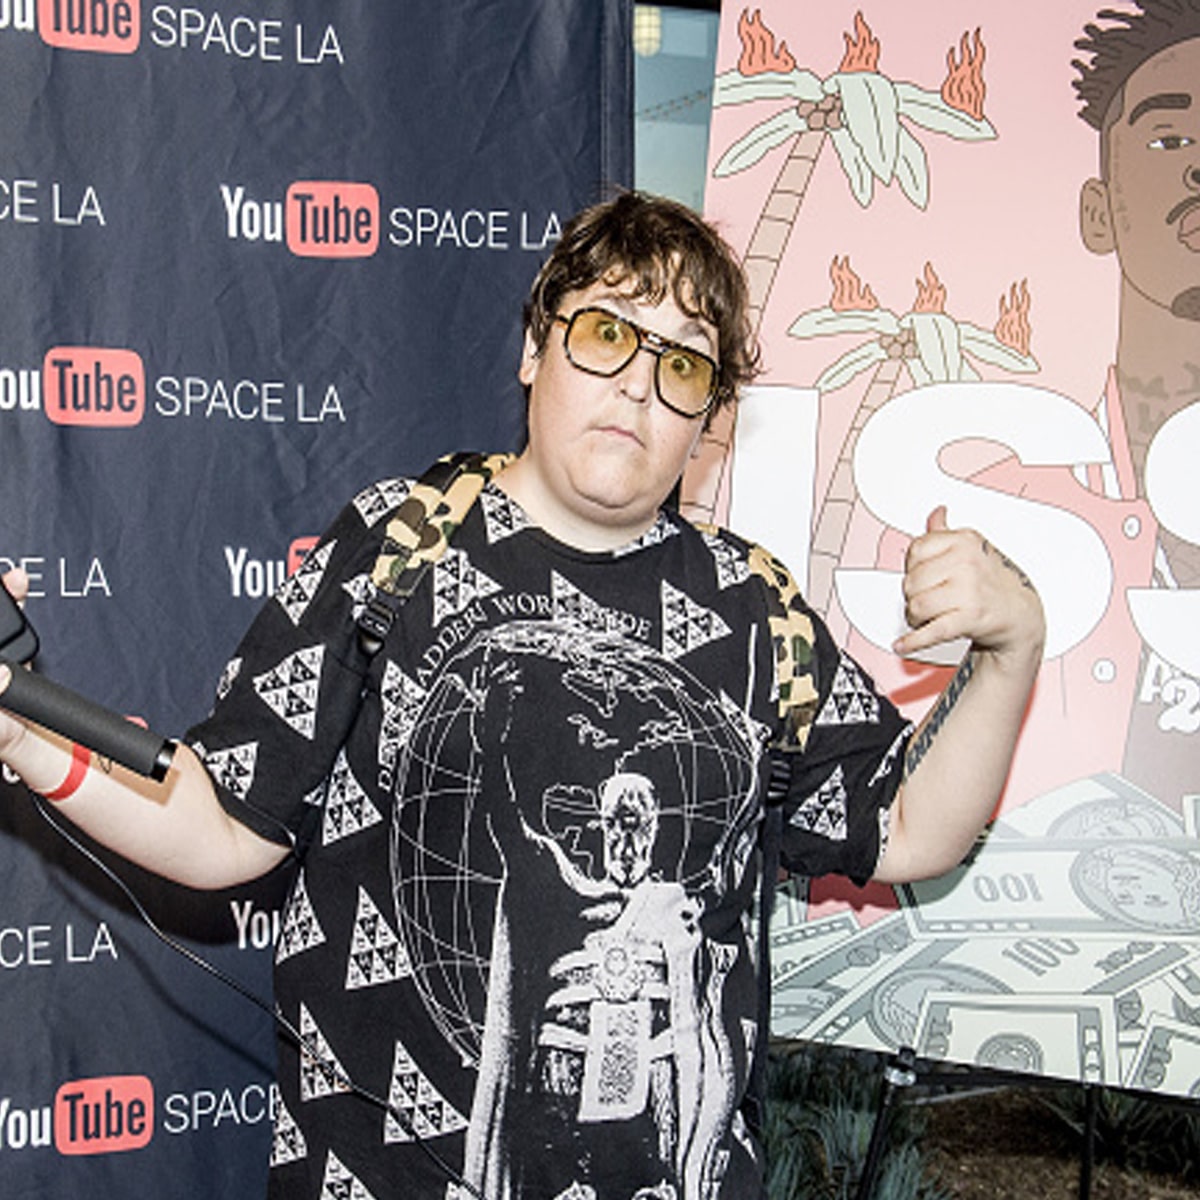 actor andy milonakis attends the 21 savage album release event